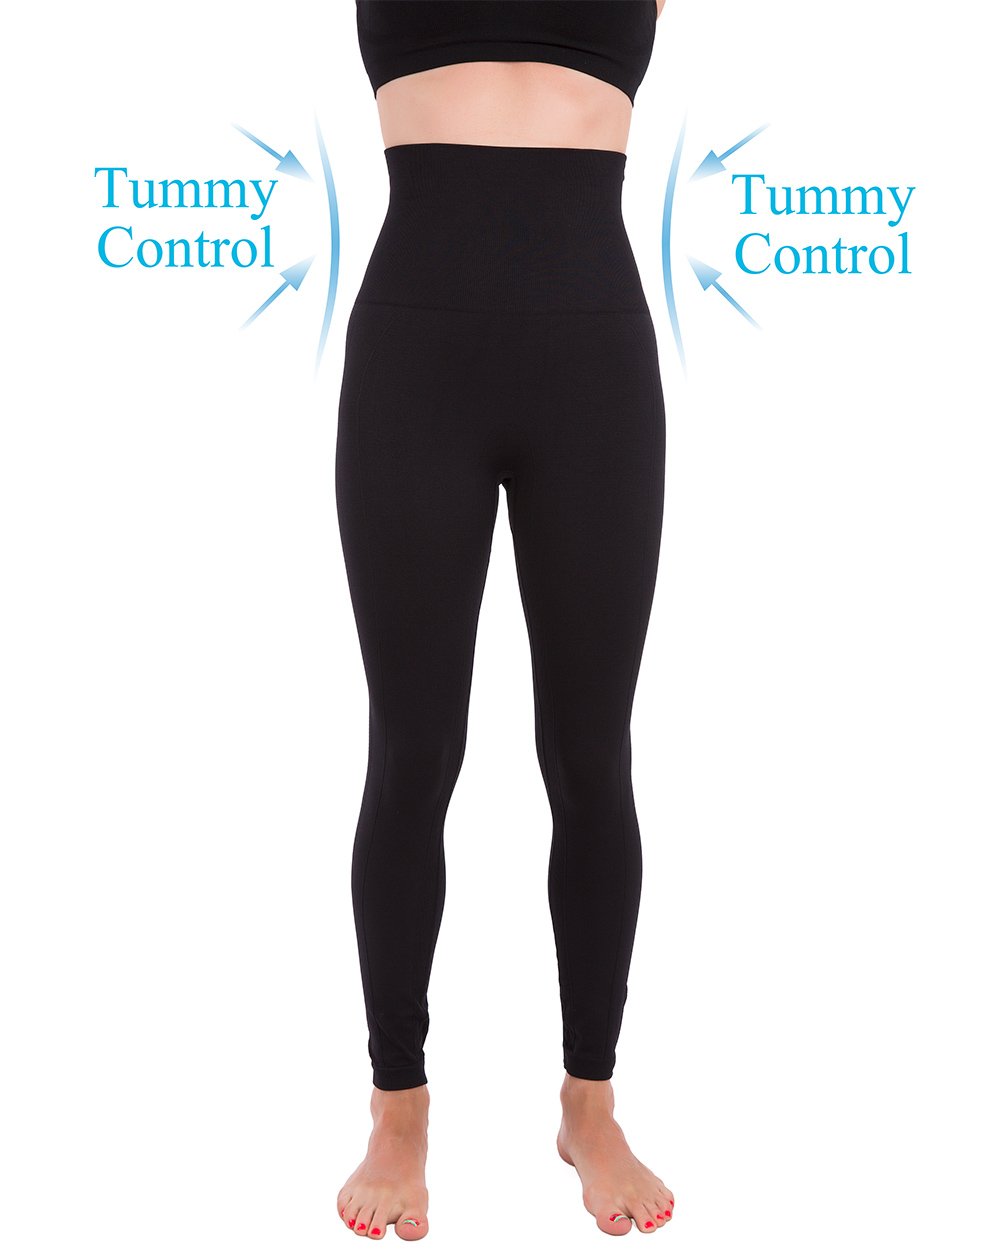 Activewear Thick High Waist Tummy Compression Slimming Body Leggings Pant